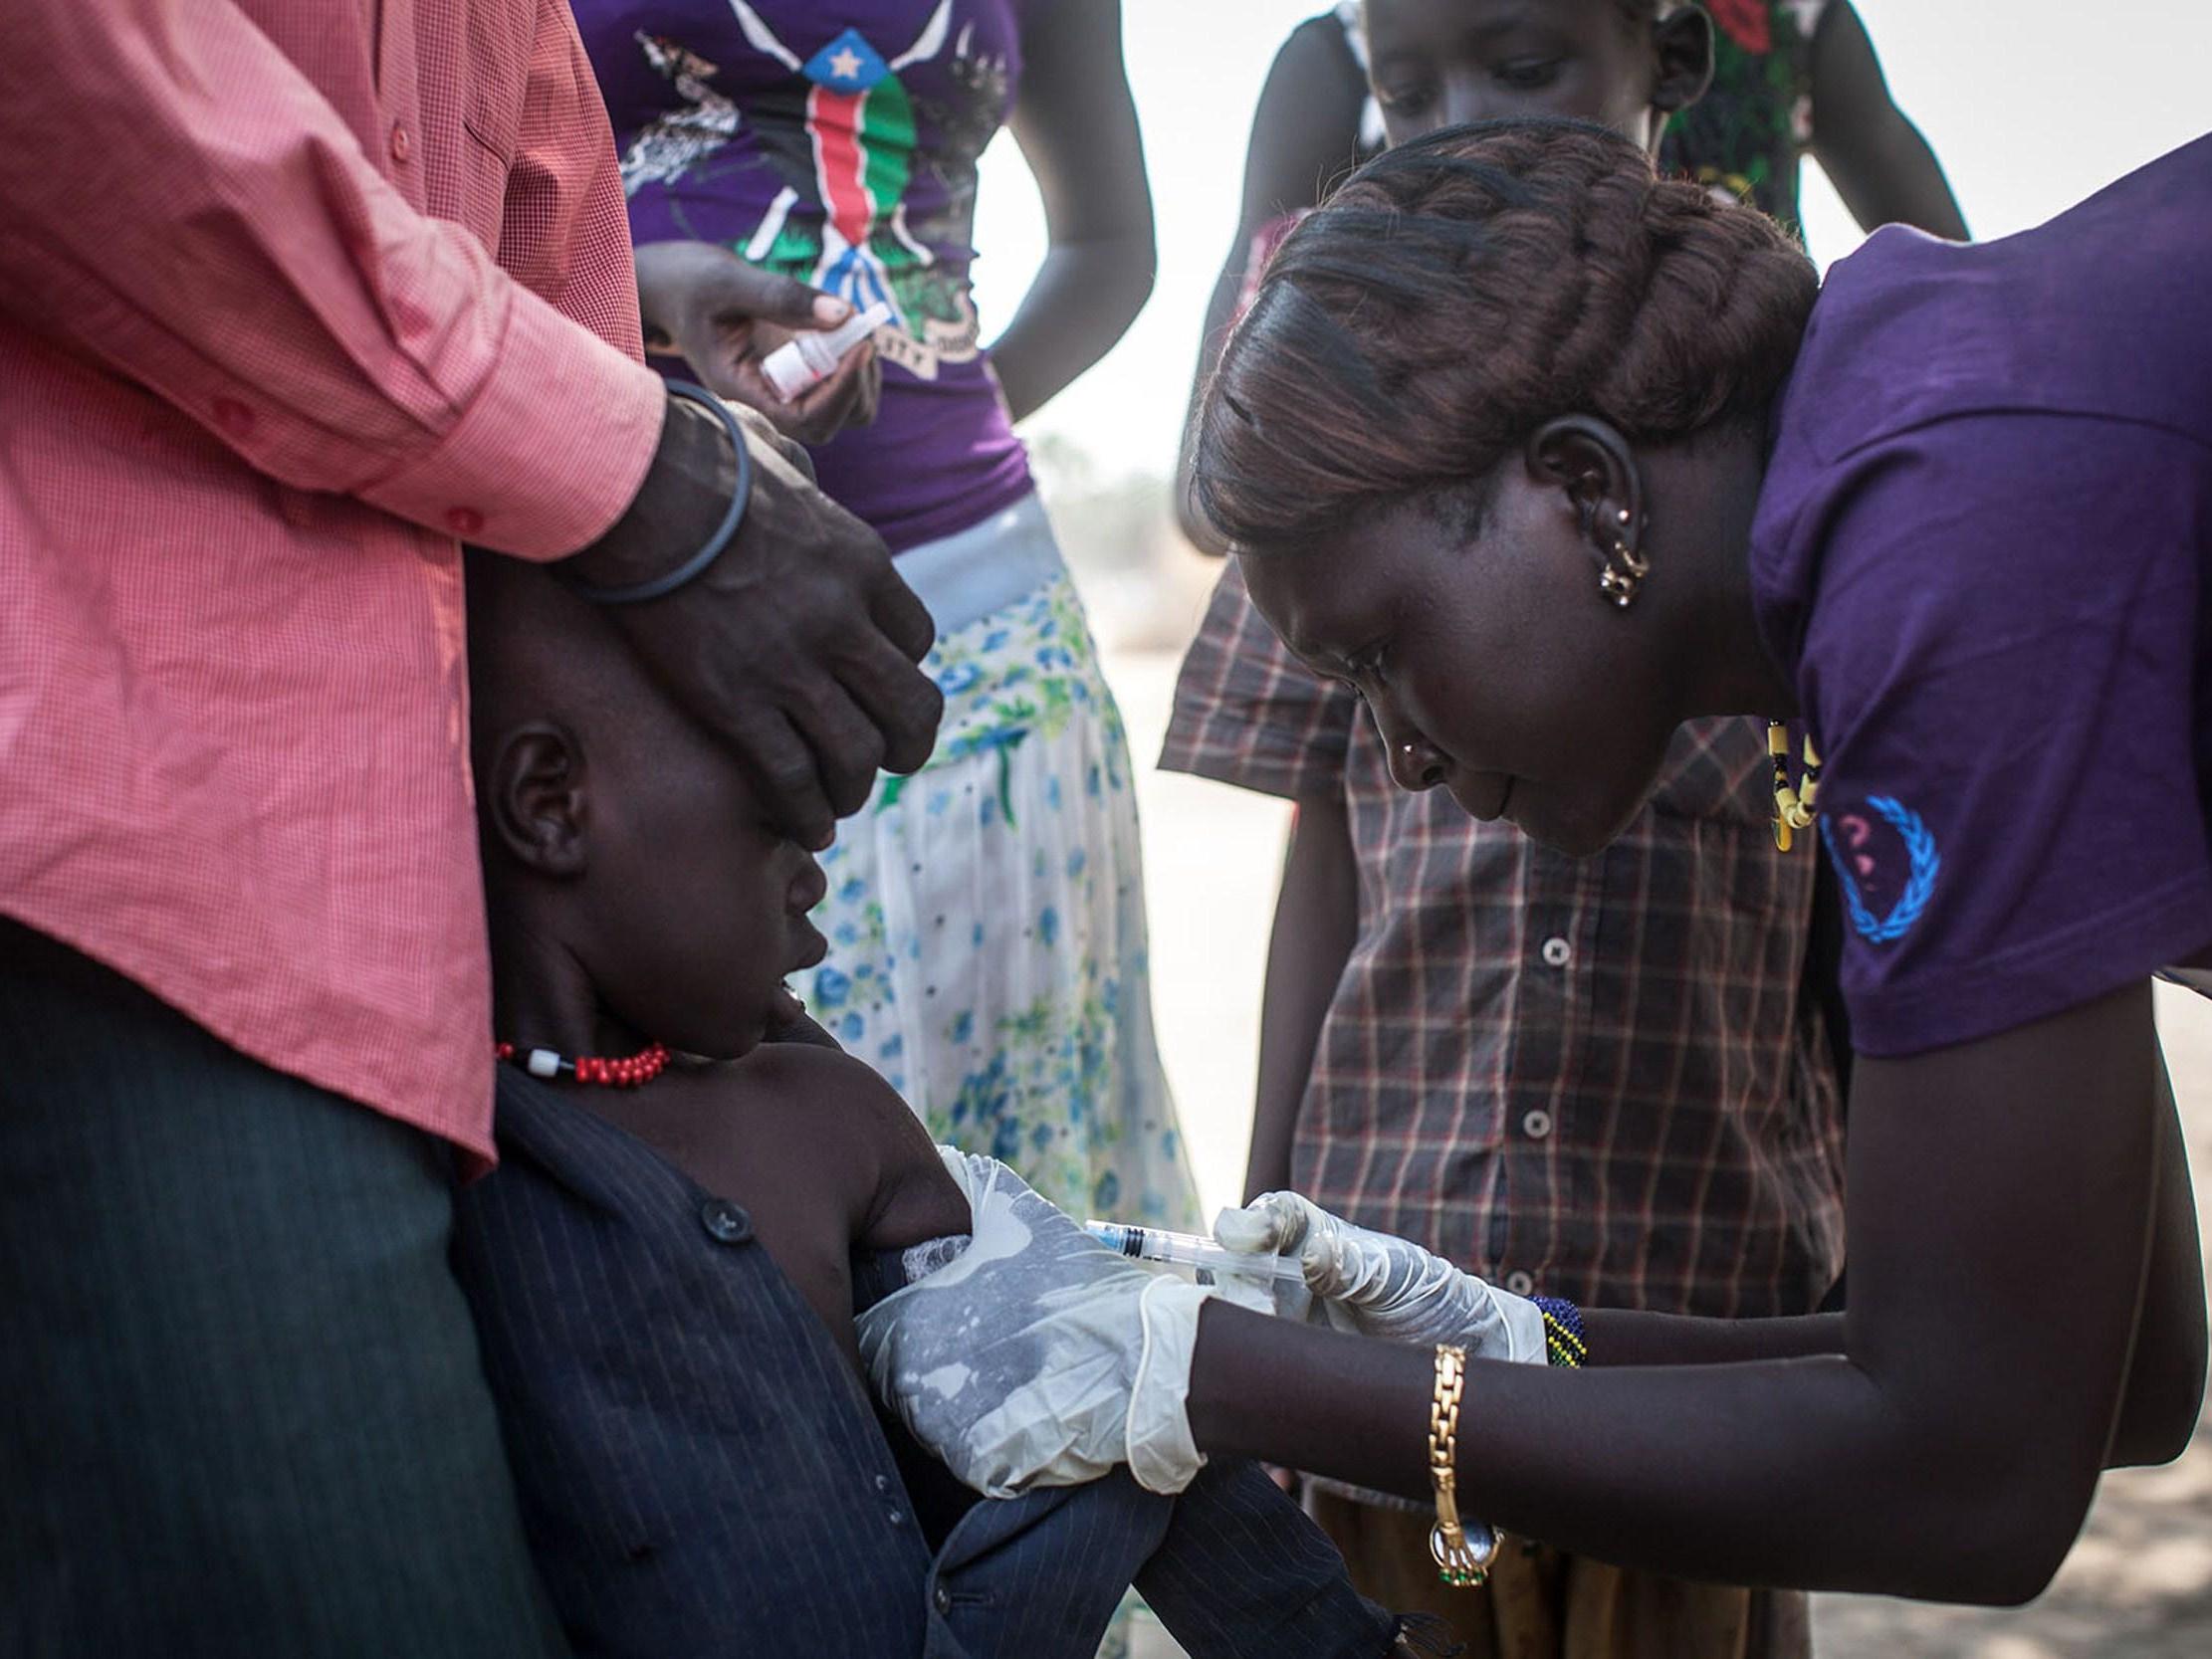 A member of Doctors Without Borders (MSF) administers polio vaccines to children in Minkammen, south Sudan